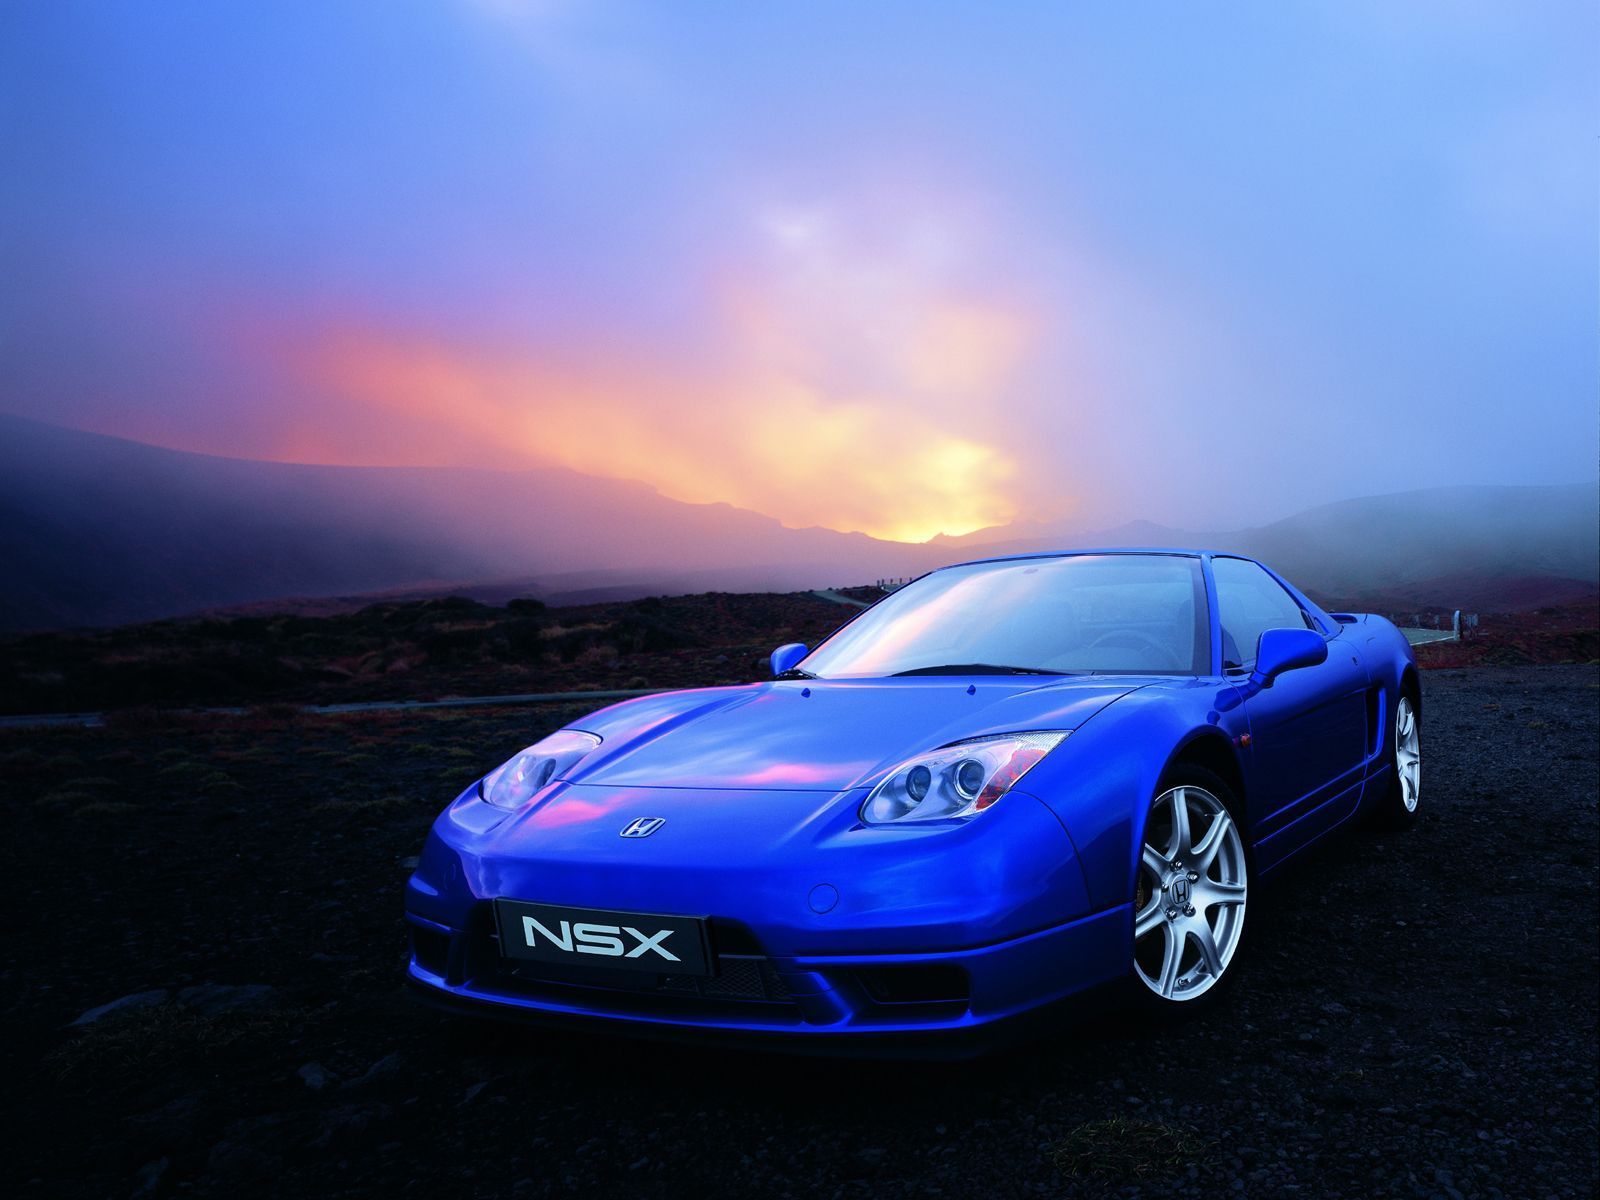 2002 was the year for the first NSX's exterior facelift